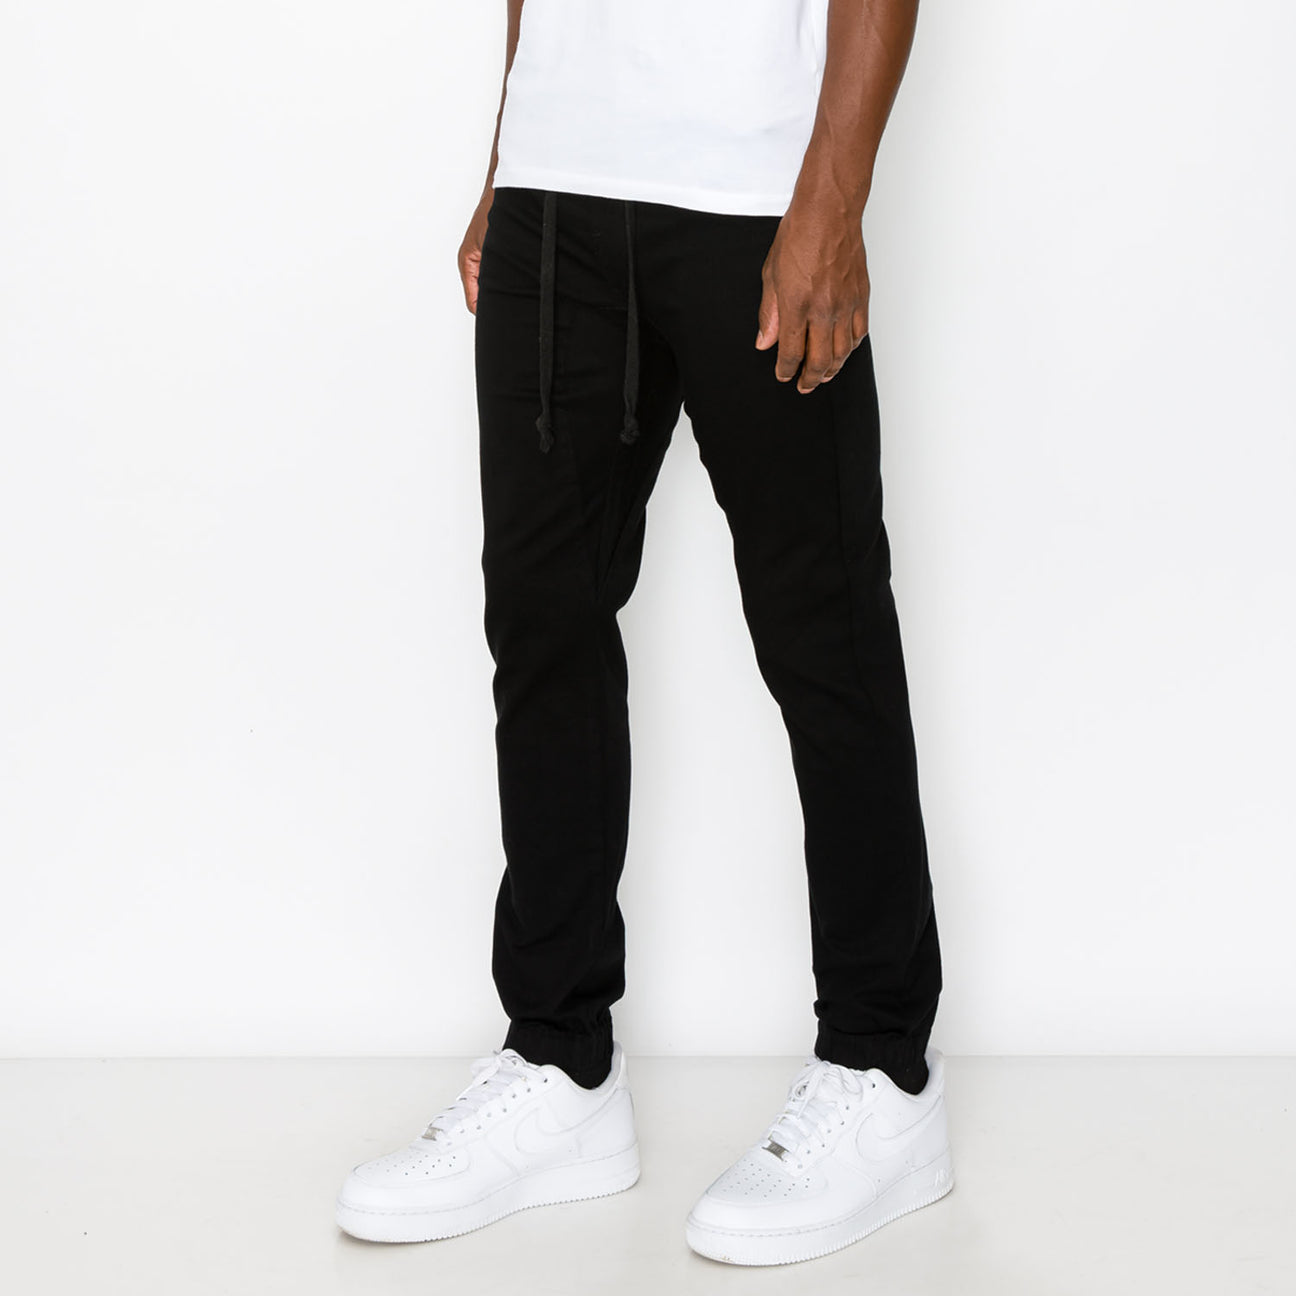 Victory Lap Joggers in Black